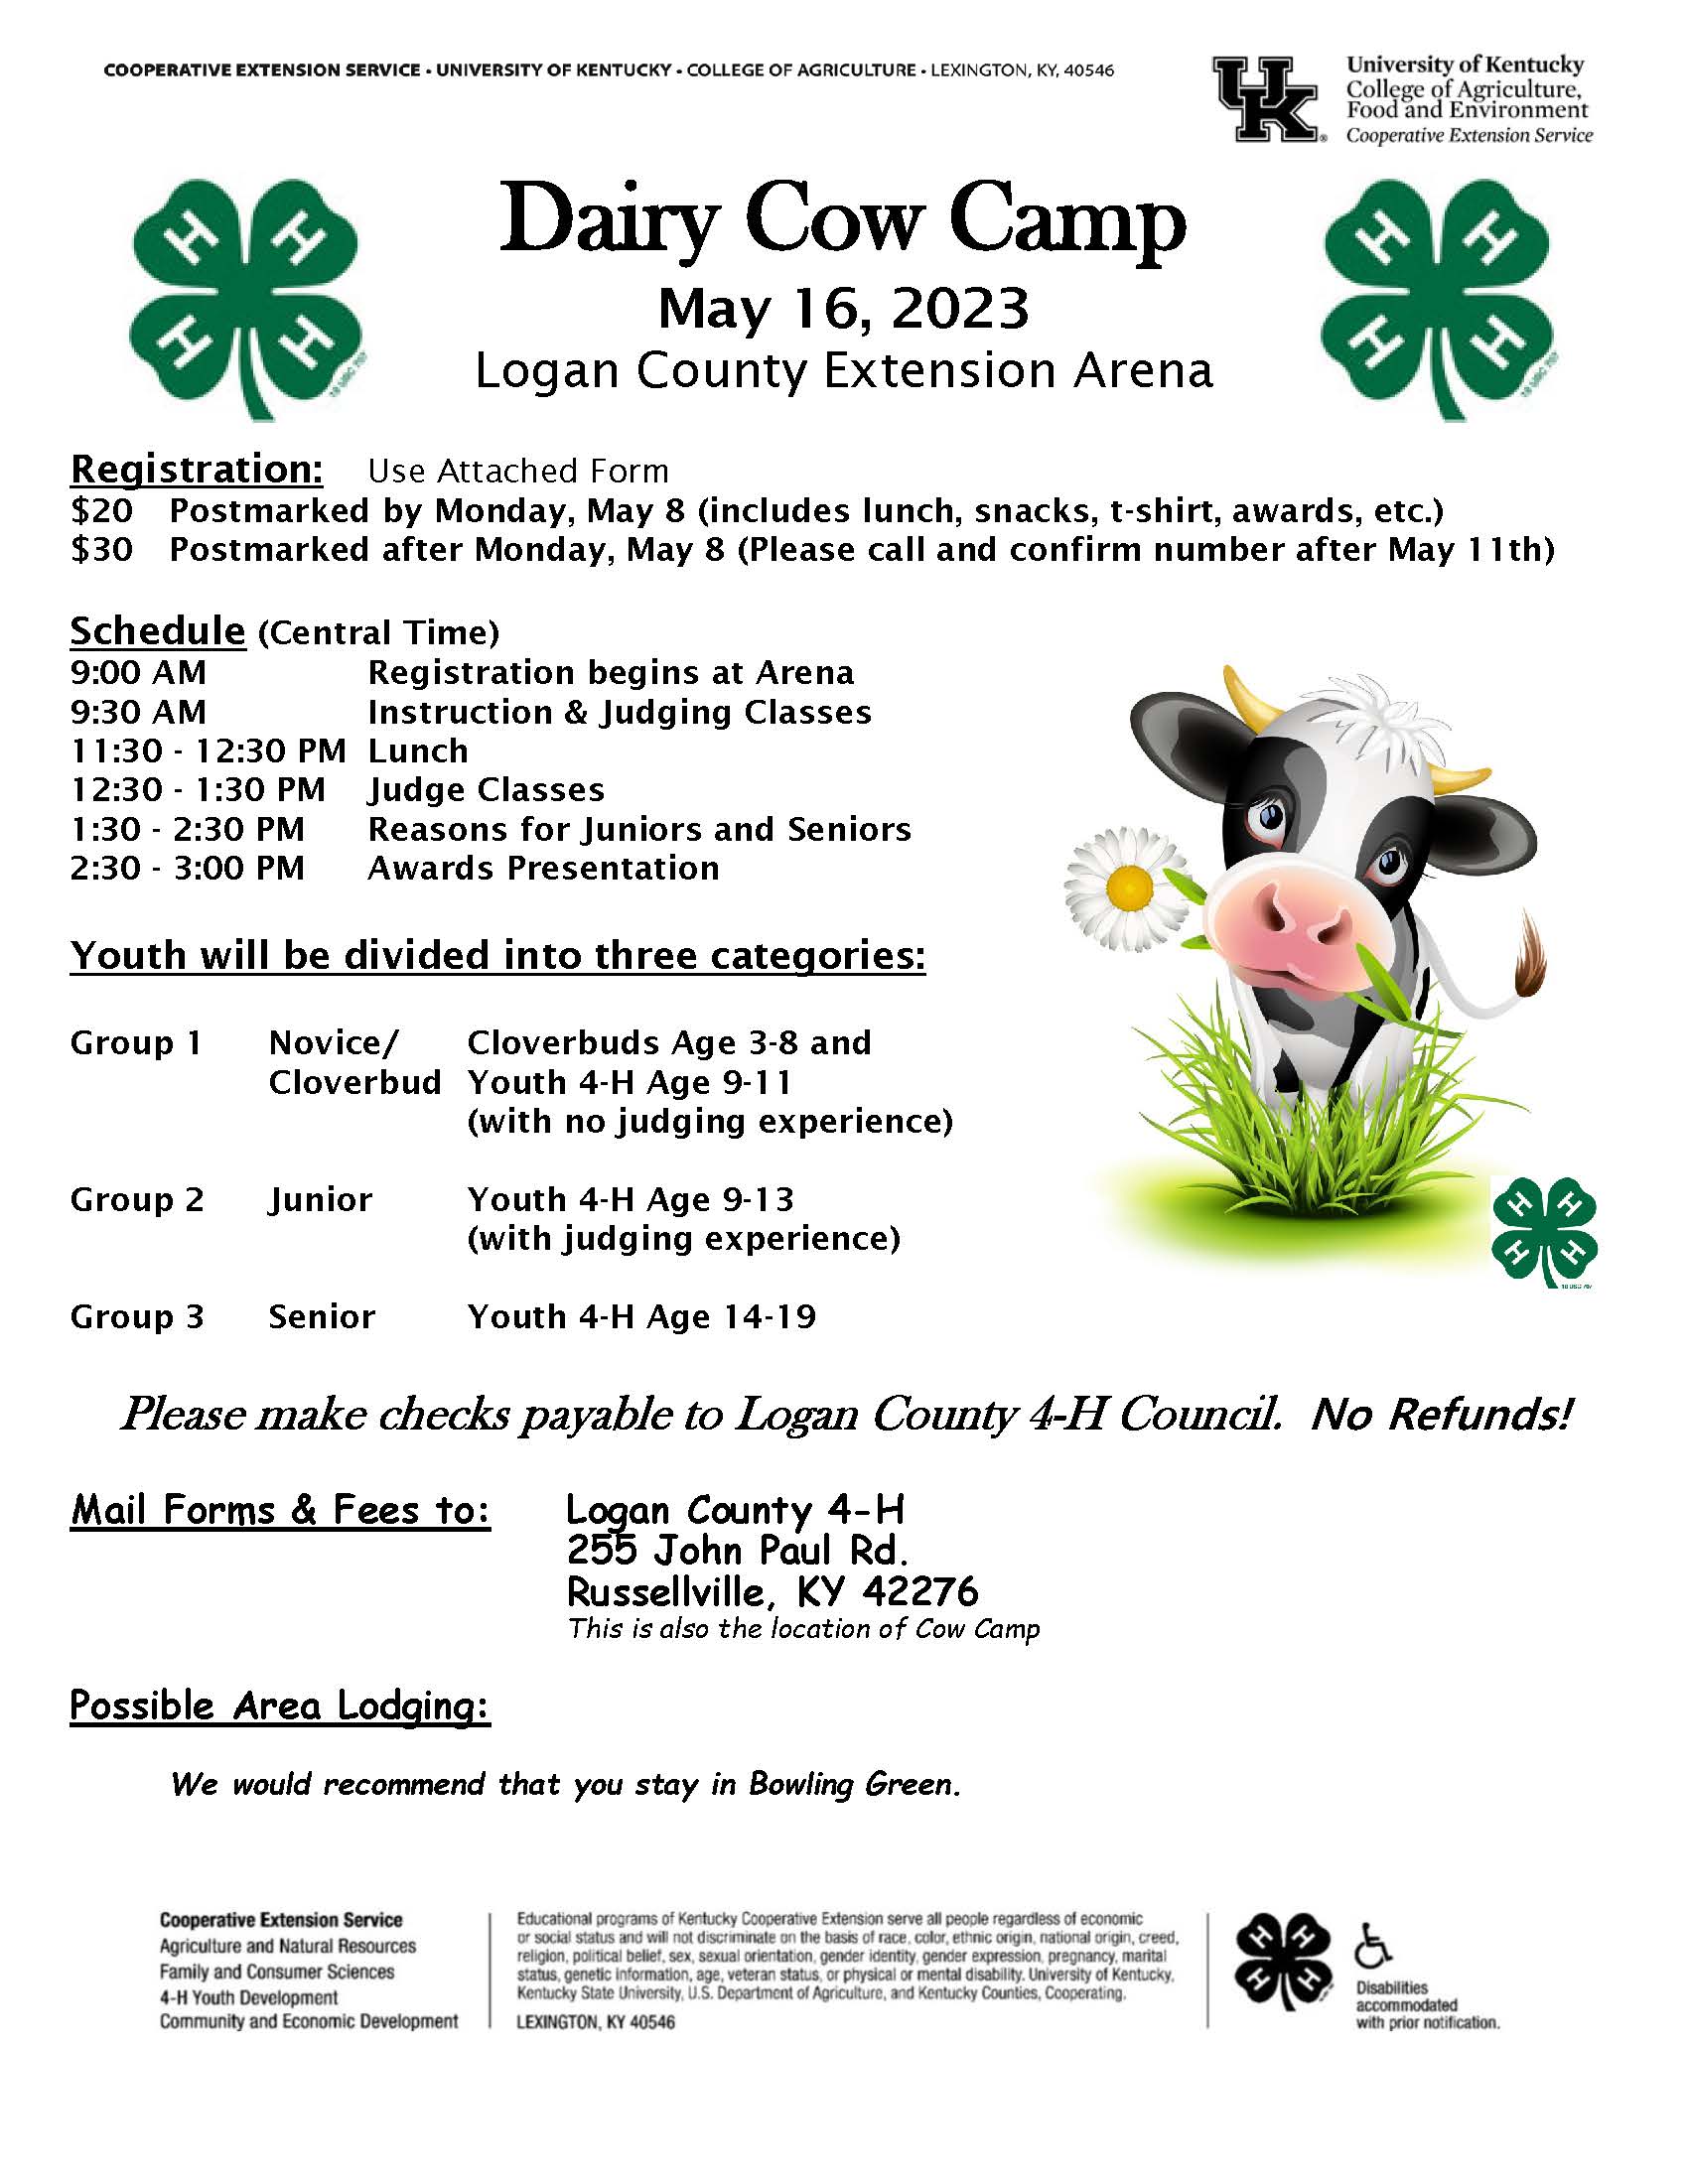 Dairy Cow Camp Flyer